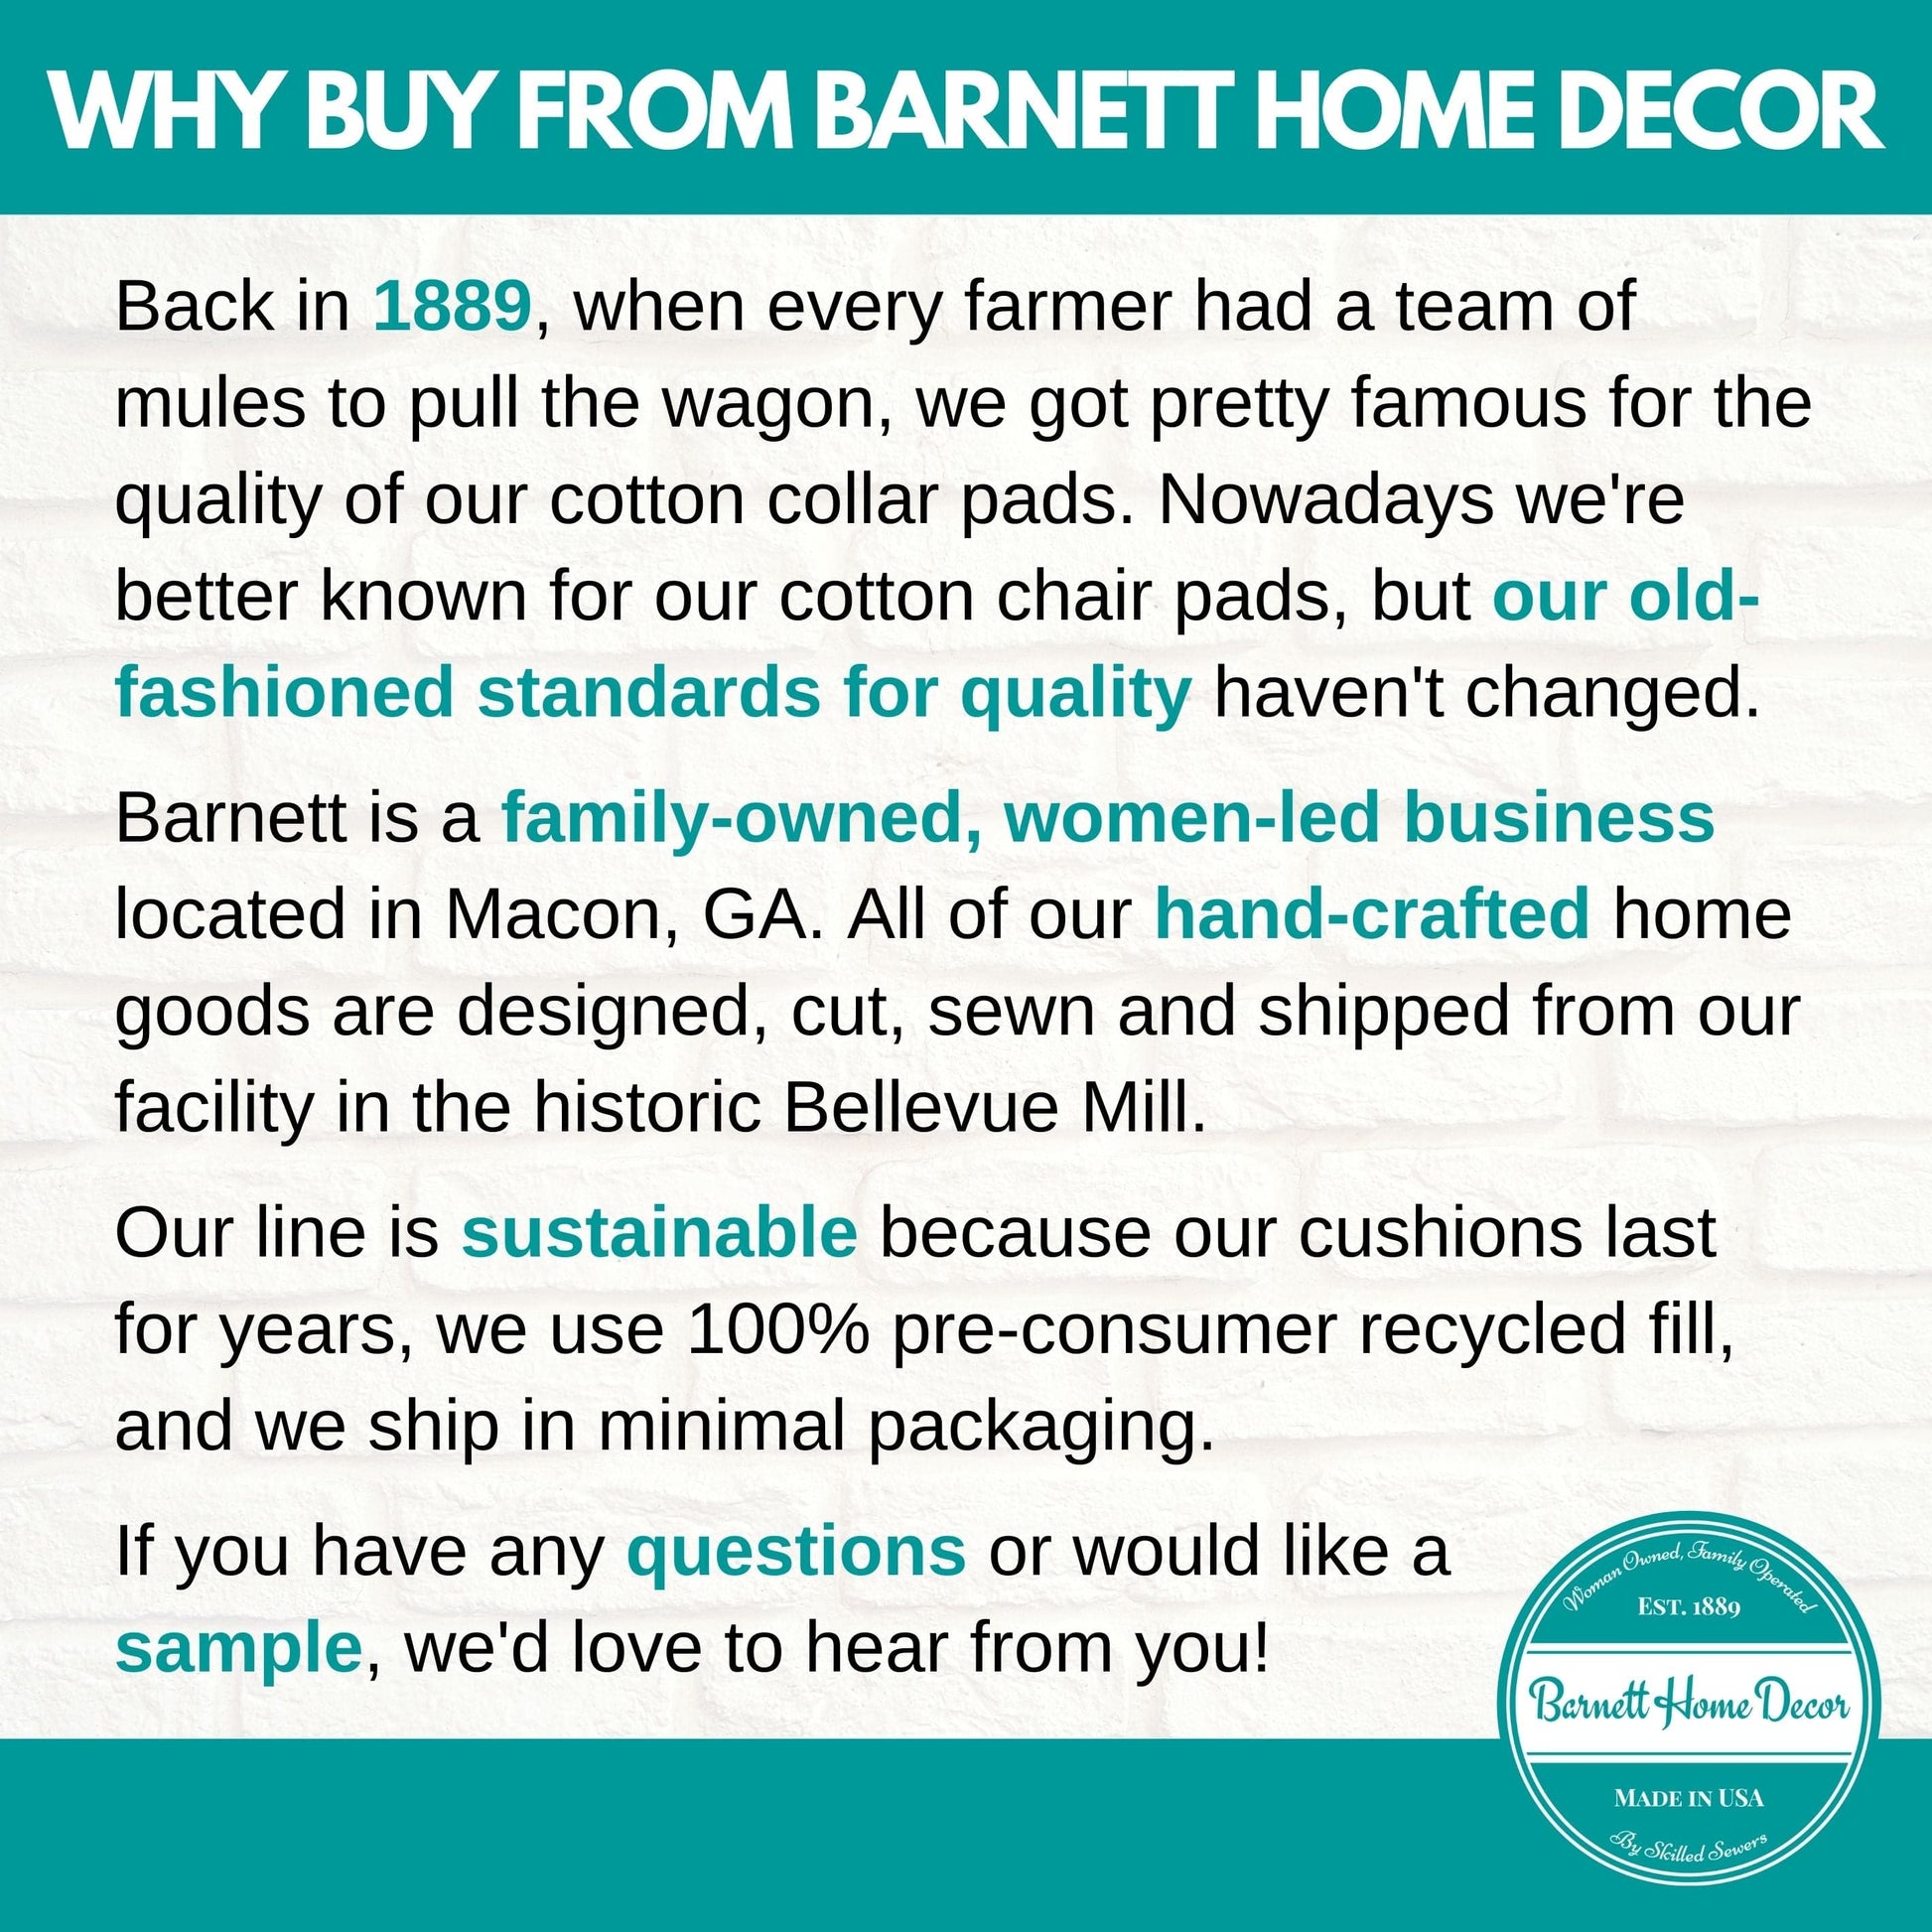 Why Buy From Barnett Home Decor? We're a woman-led, family operated business located in Macon, GA producing hand crafted home goods.